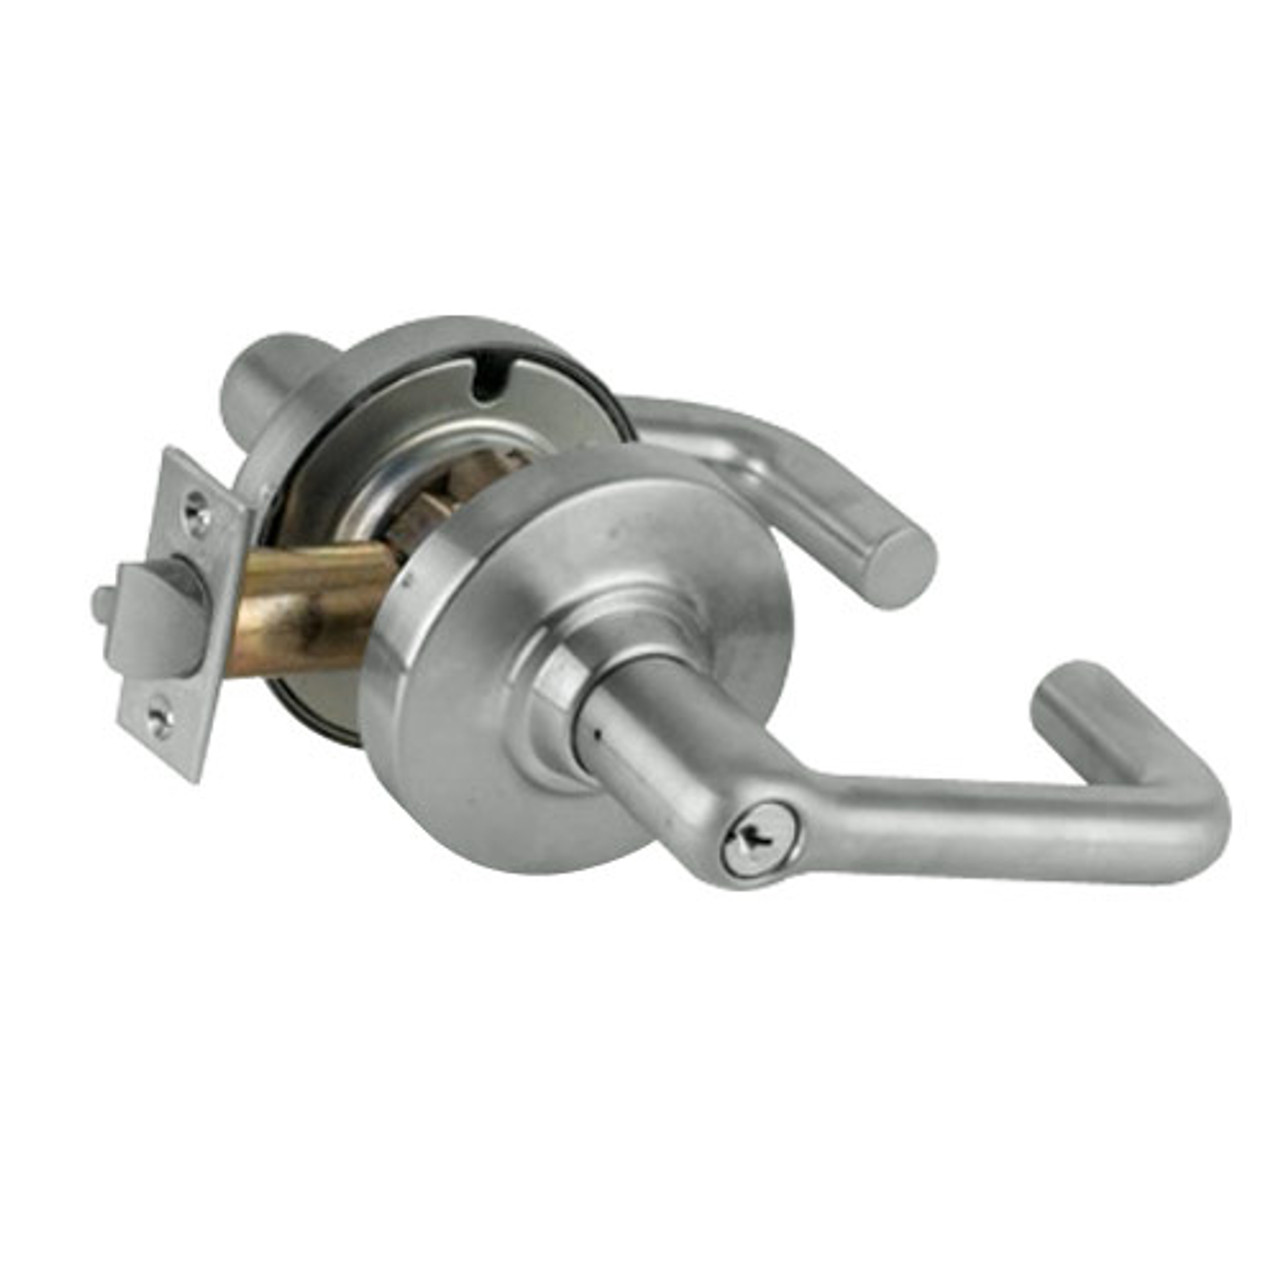 ND53PD-TLR-619 Schlage Tubular Cylindrical Lock in Satin Nickel